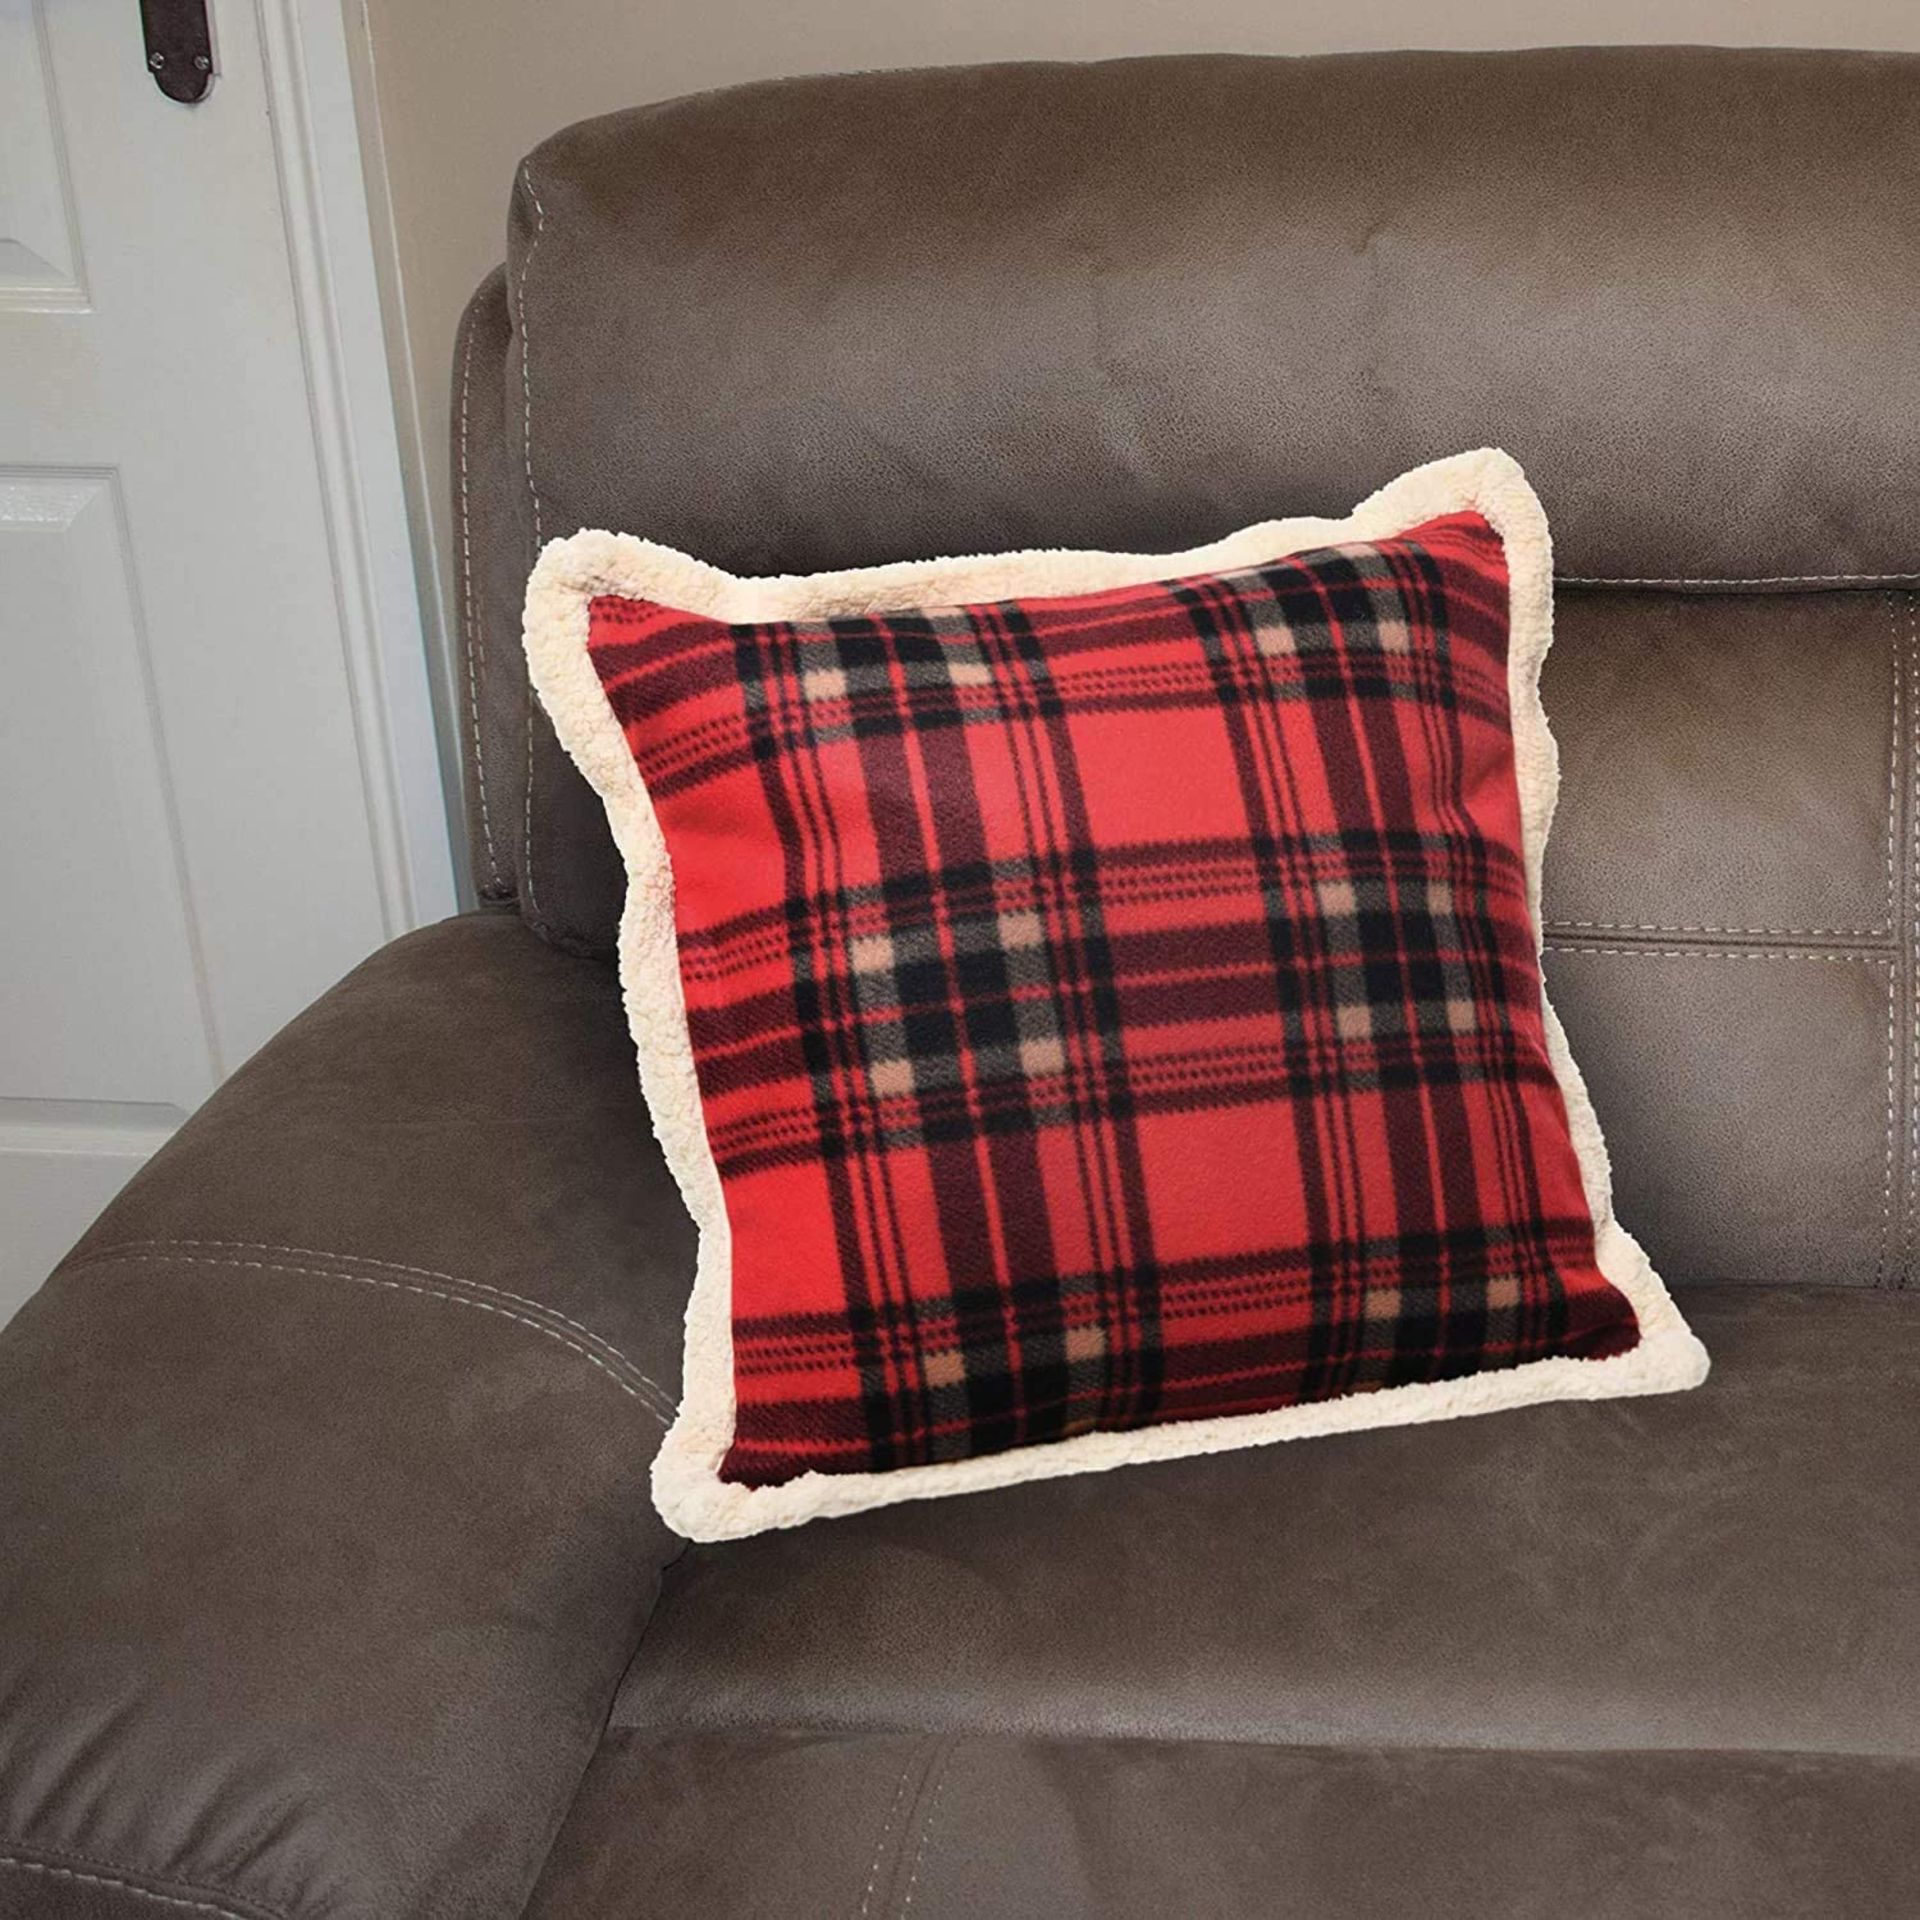 6 x Soft Touch Red Tartan Cushions with Fleecy Trim - Image 4 of 7